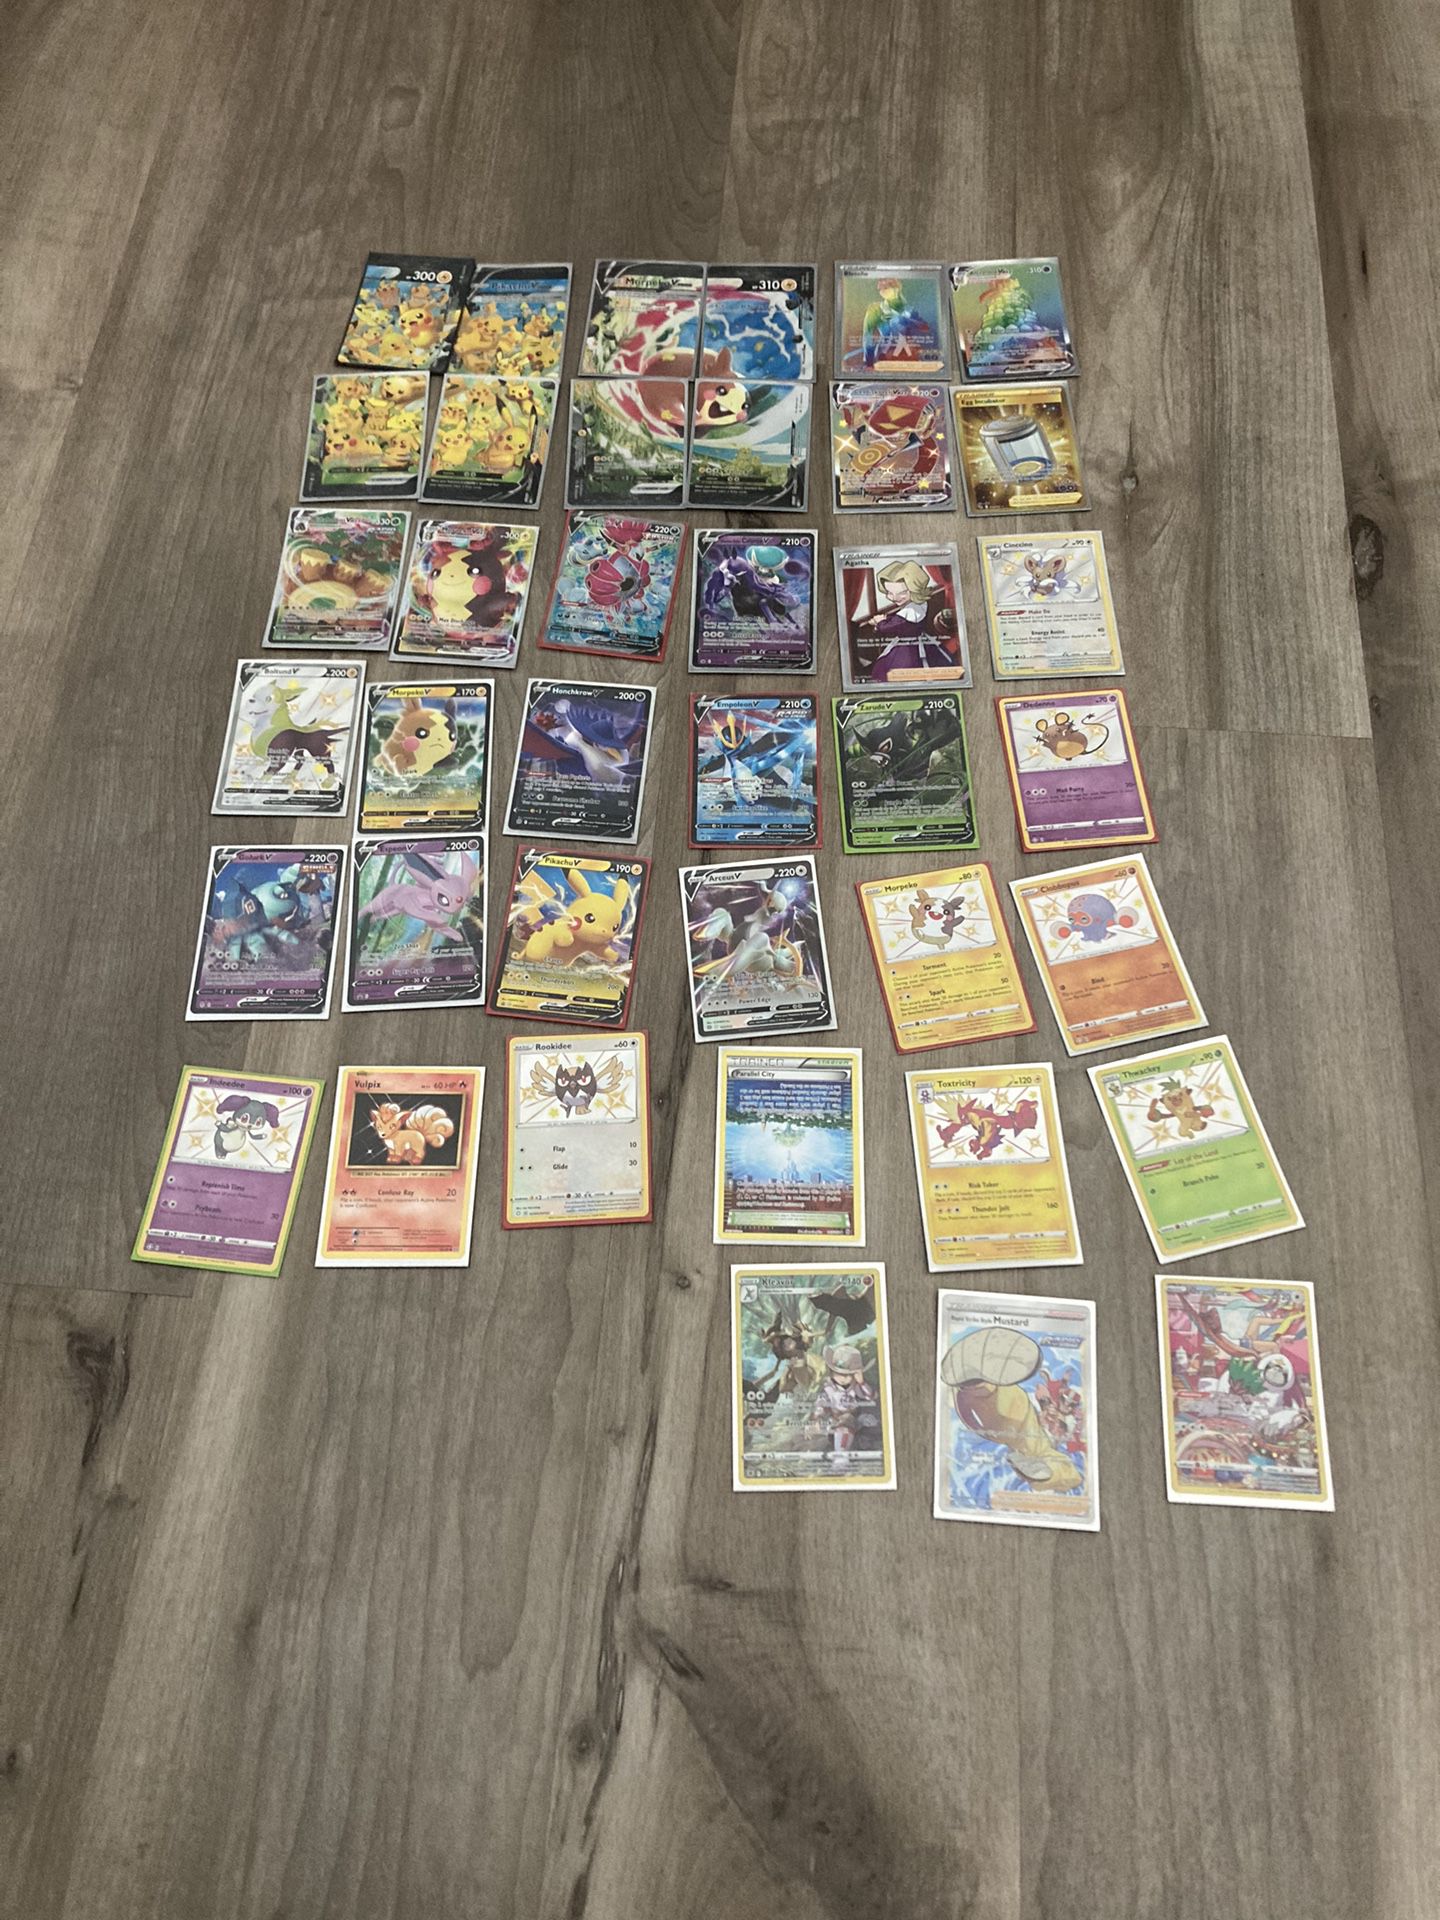 Rare Pokemon Cards You’re Price With Vmaxs And For 30 Dollars More Get 1000 Old Pokemon Cards For 20 Dollars More At Your Price 